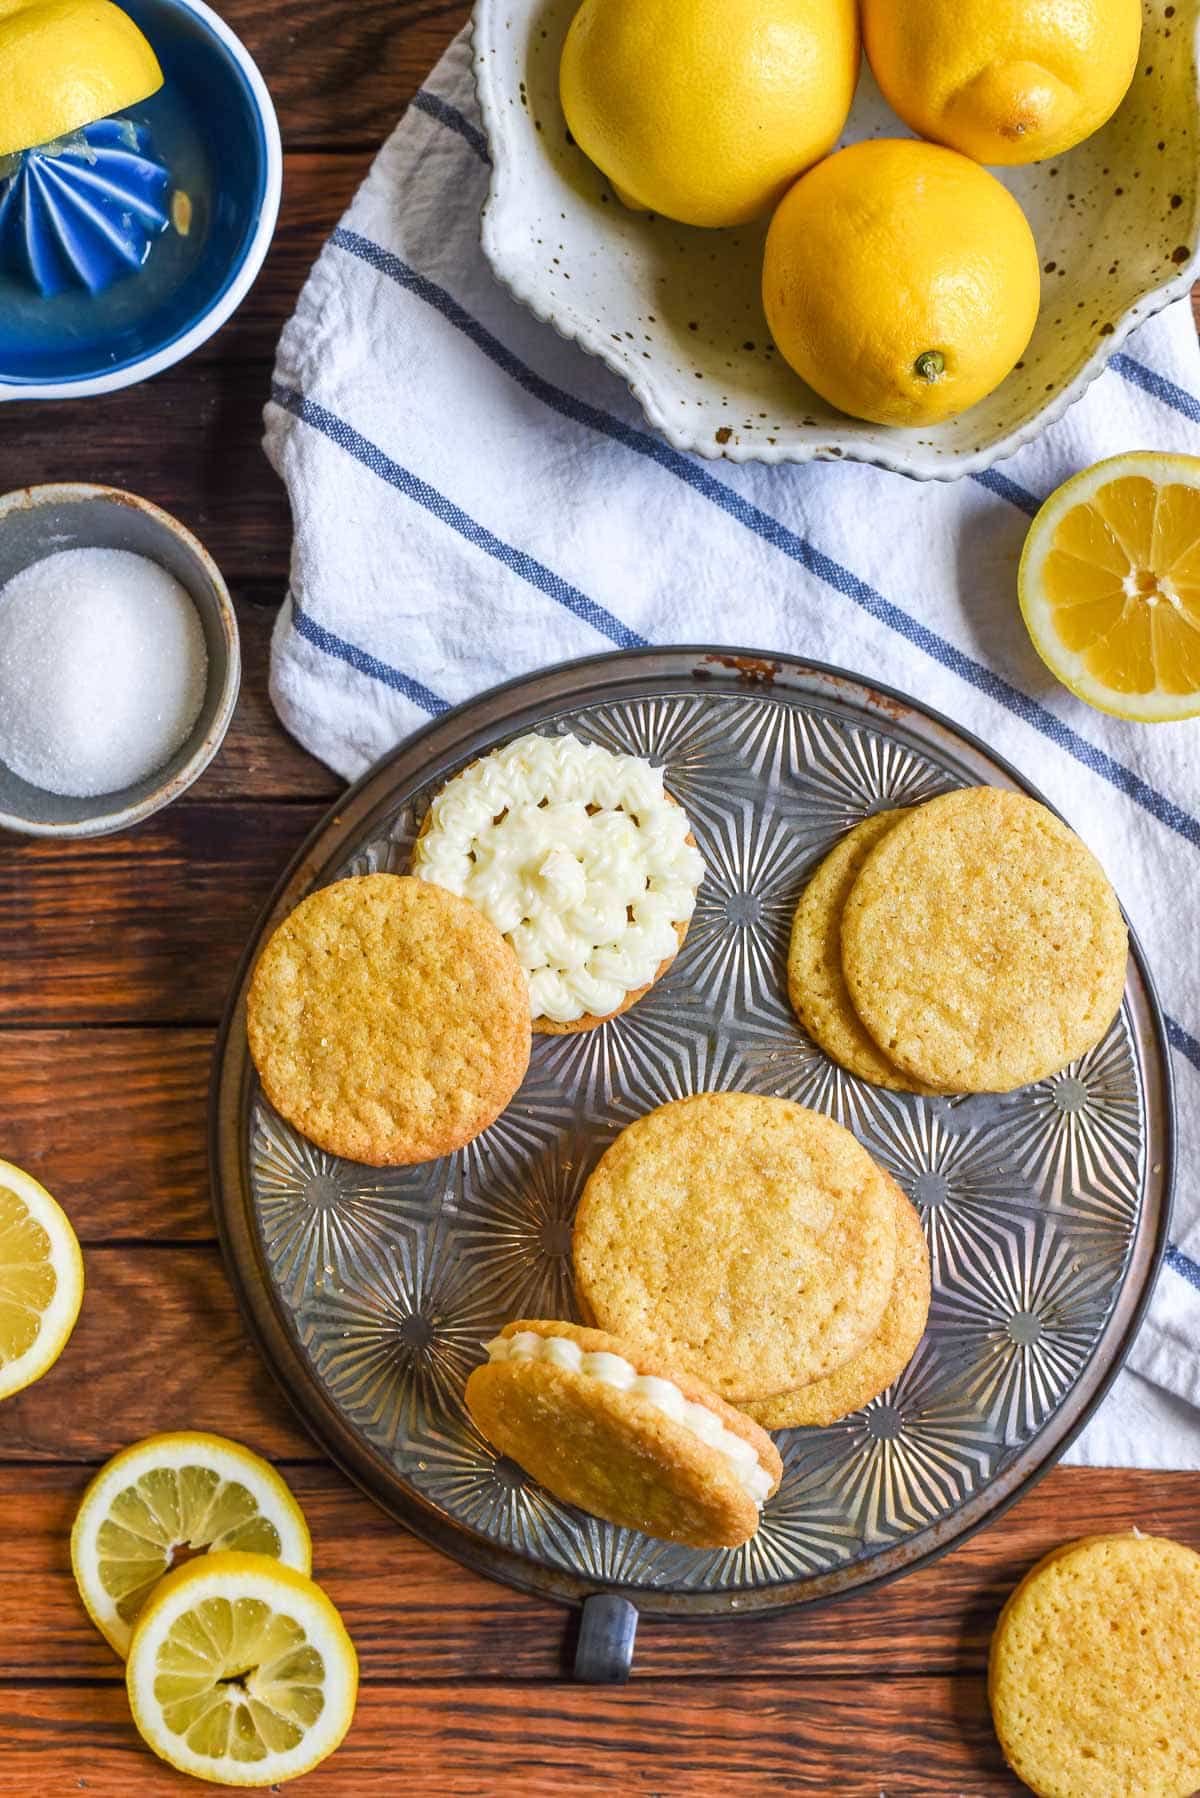 Lemon Sandwich Cookies are a lemon lovers dream! Soft and chewy lemon sugar cookies are sandwiched around a zingy lemon cream cheese filling for the ultimate spring cookie!